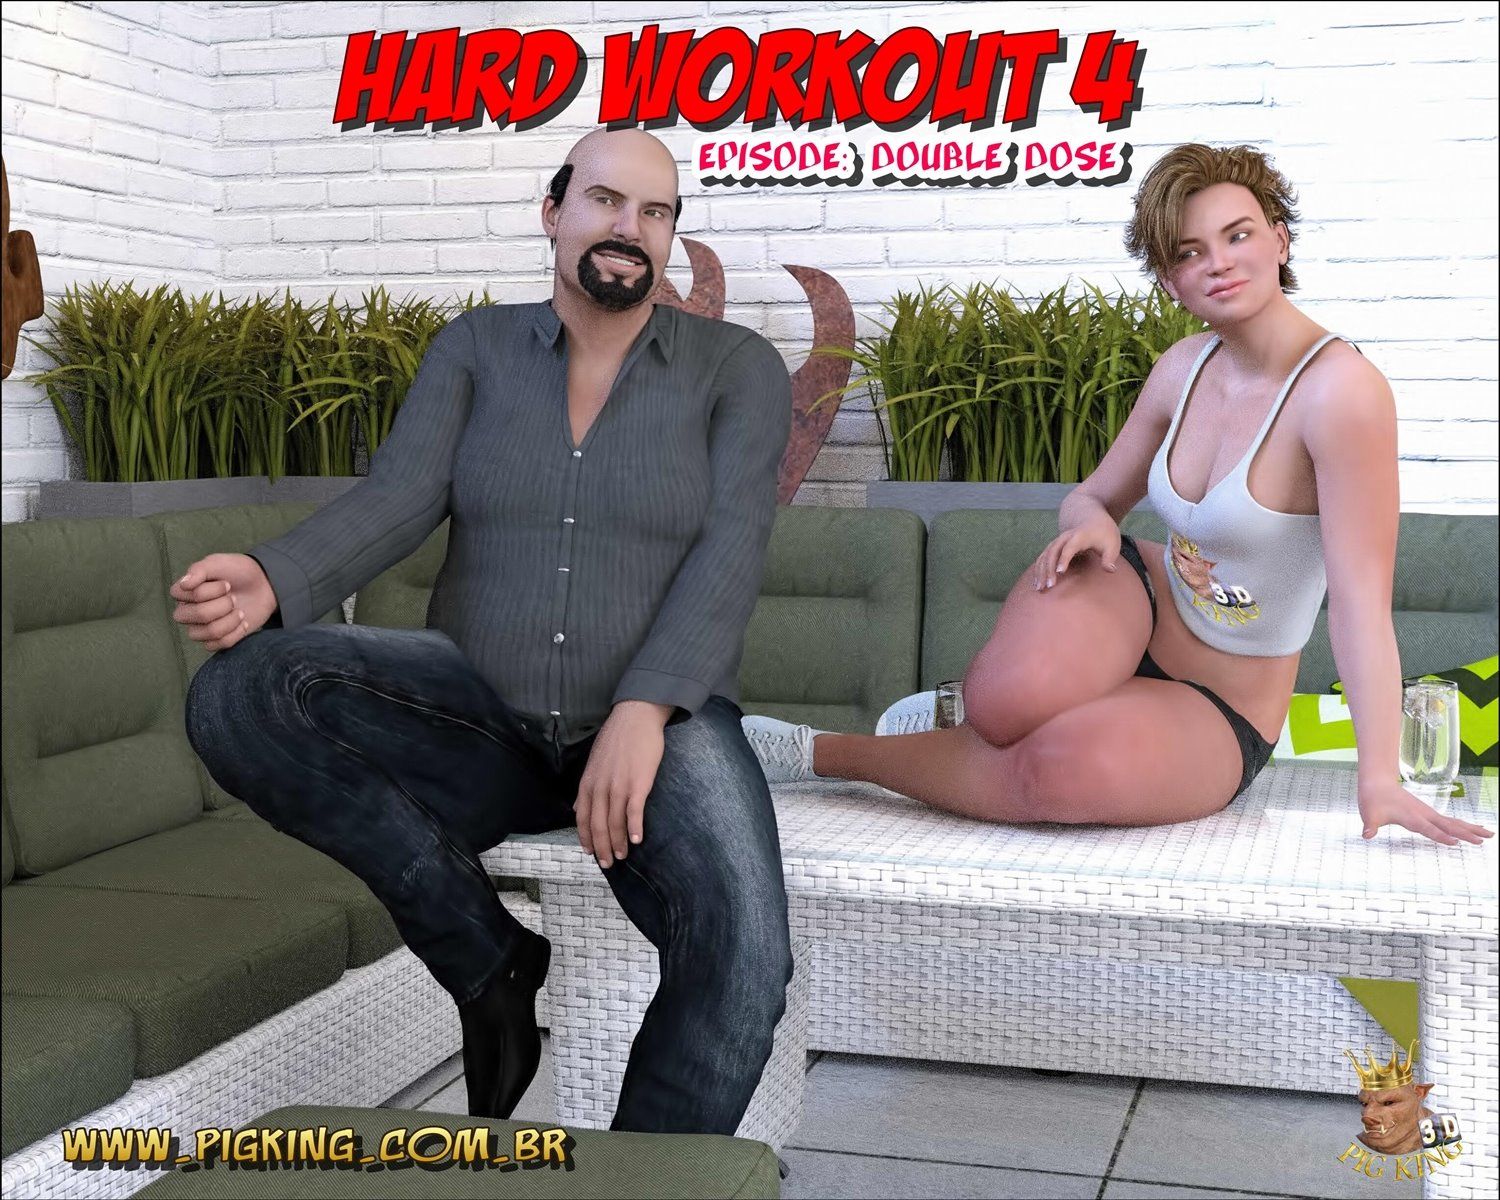 Pig King - Hard Workout 4 Double Dose page 1